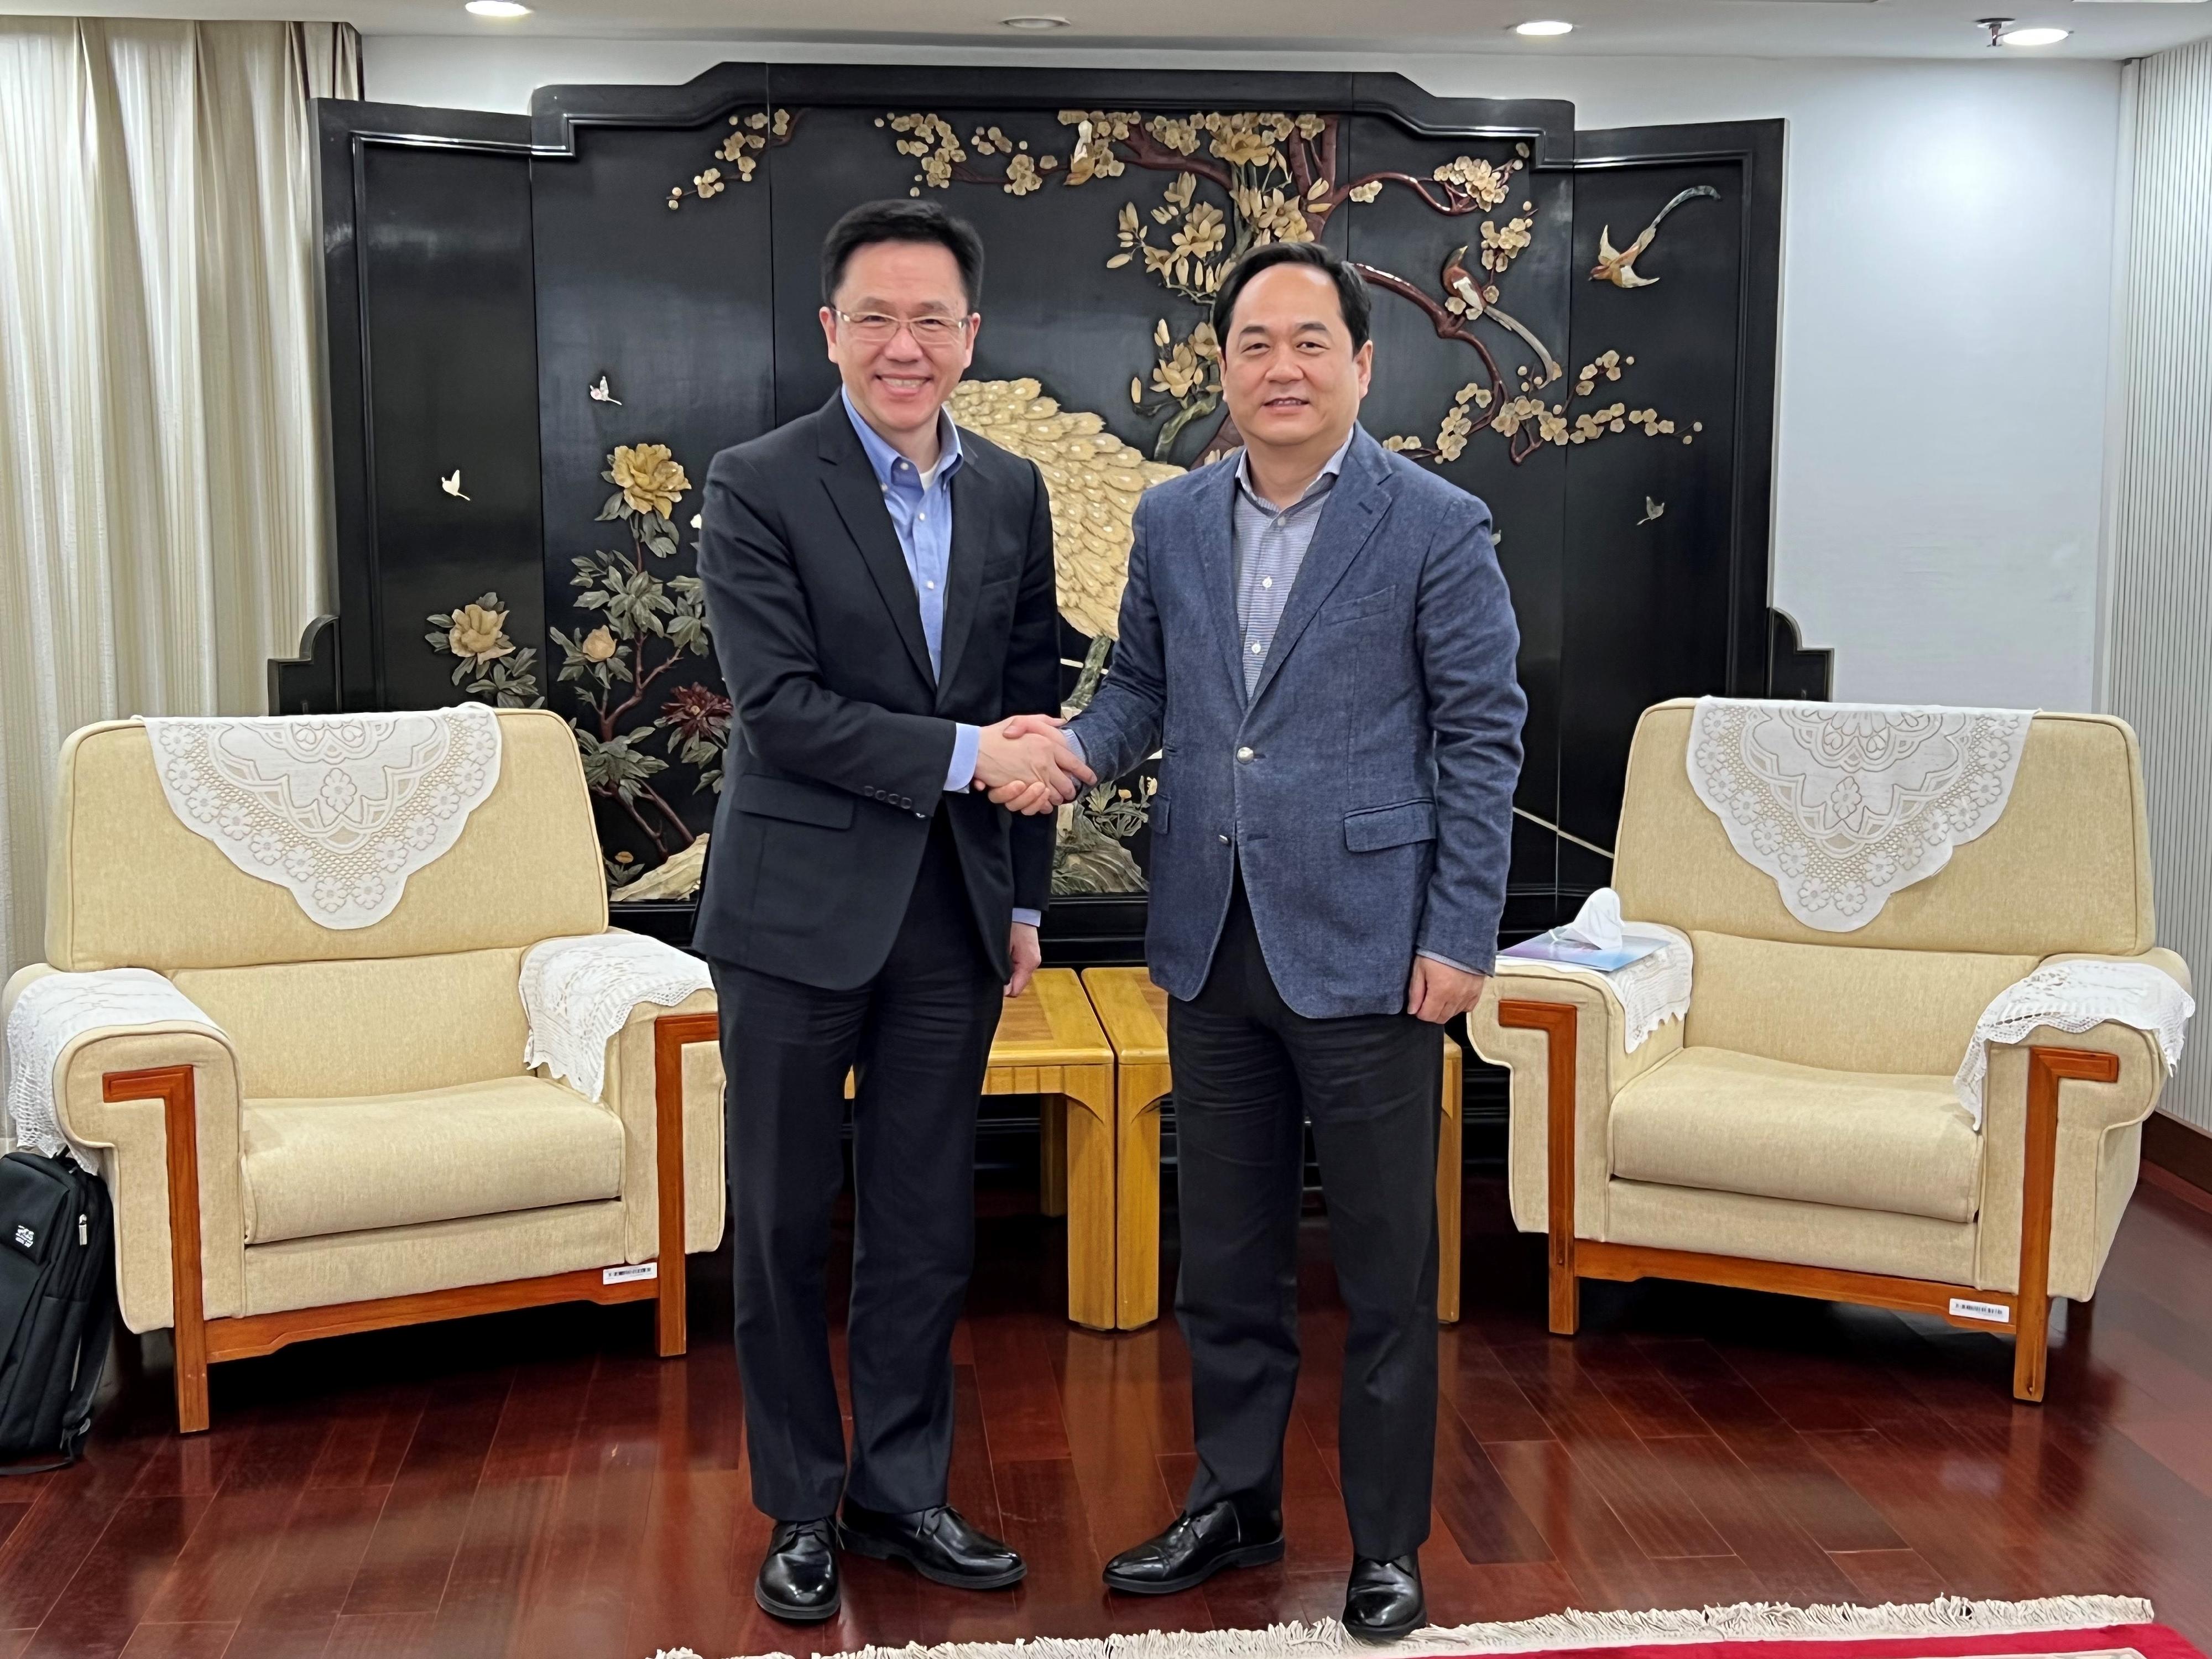 The Secretary for Innovation, Technology and Industry, Professor Sun Dong (left), visits the Hong Kong and Macao Affairs Office (HKMAO) of the State Council in Beijing today (January 18) and pays a courtesy call on Deputy Director of the HKMAO of the State Council, Mr Yang Wanming (right).